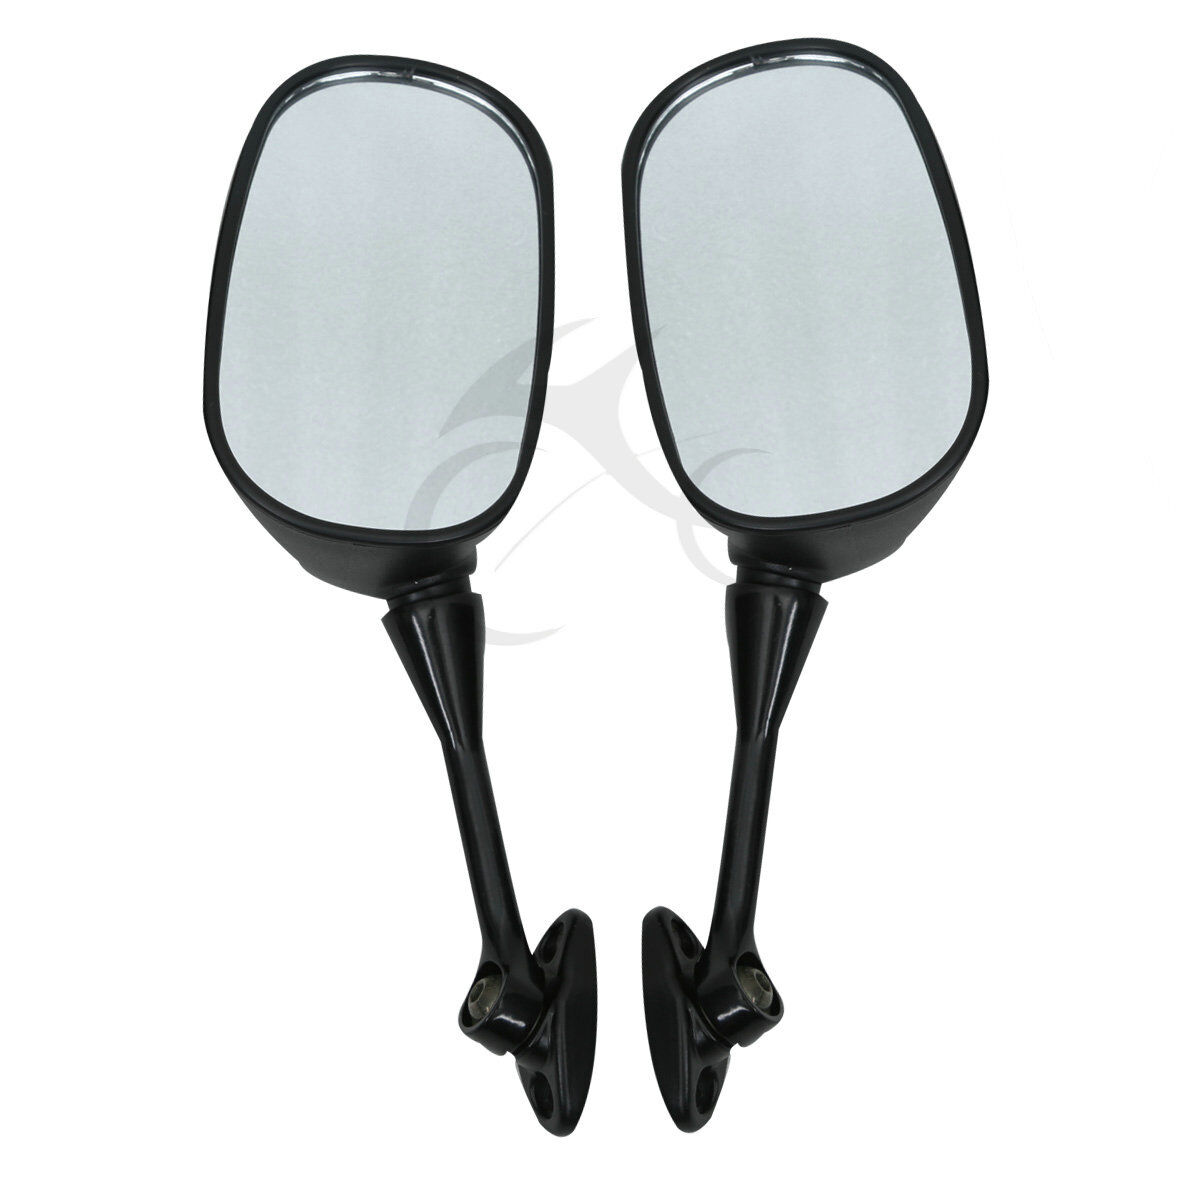 Rearview Side Mirrors Fit For Honda CBR1000RR 2004-2007 2005 2006 CBR600RR 03-23